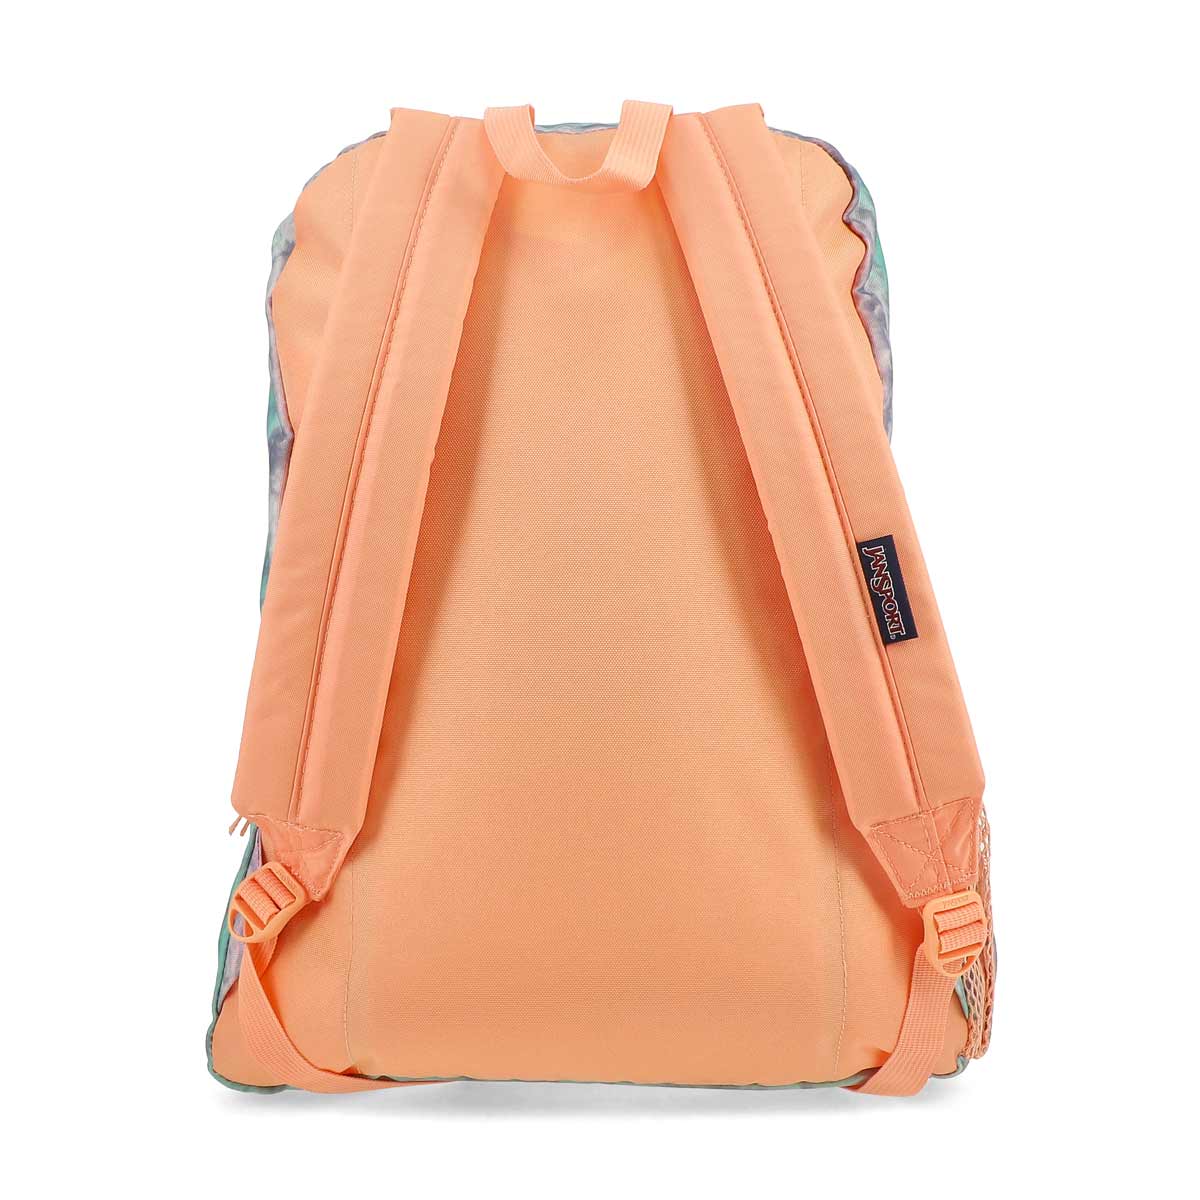 Jansport Cross Town Backpack - Cotton Candy